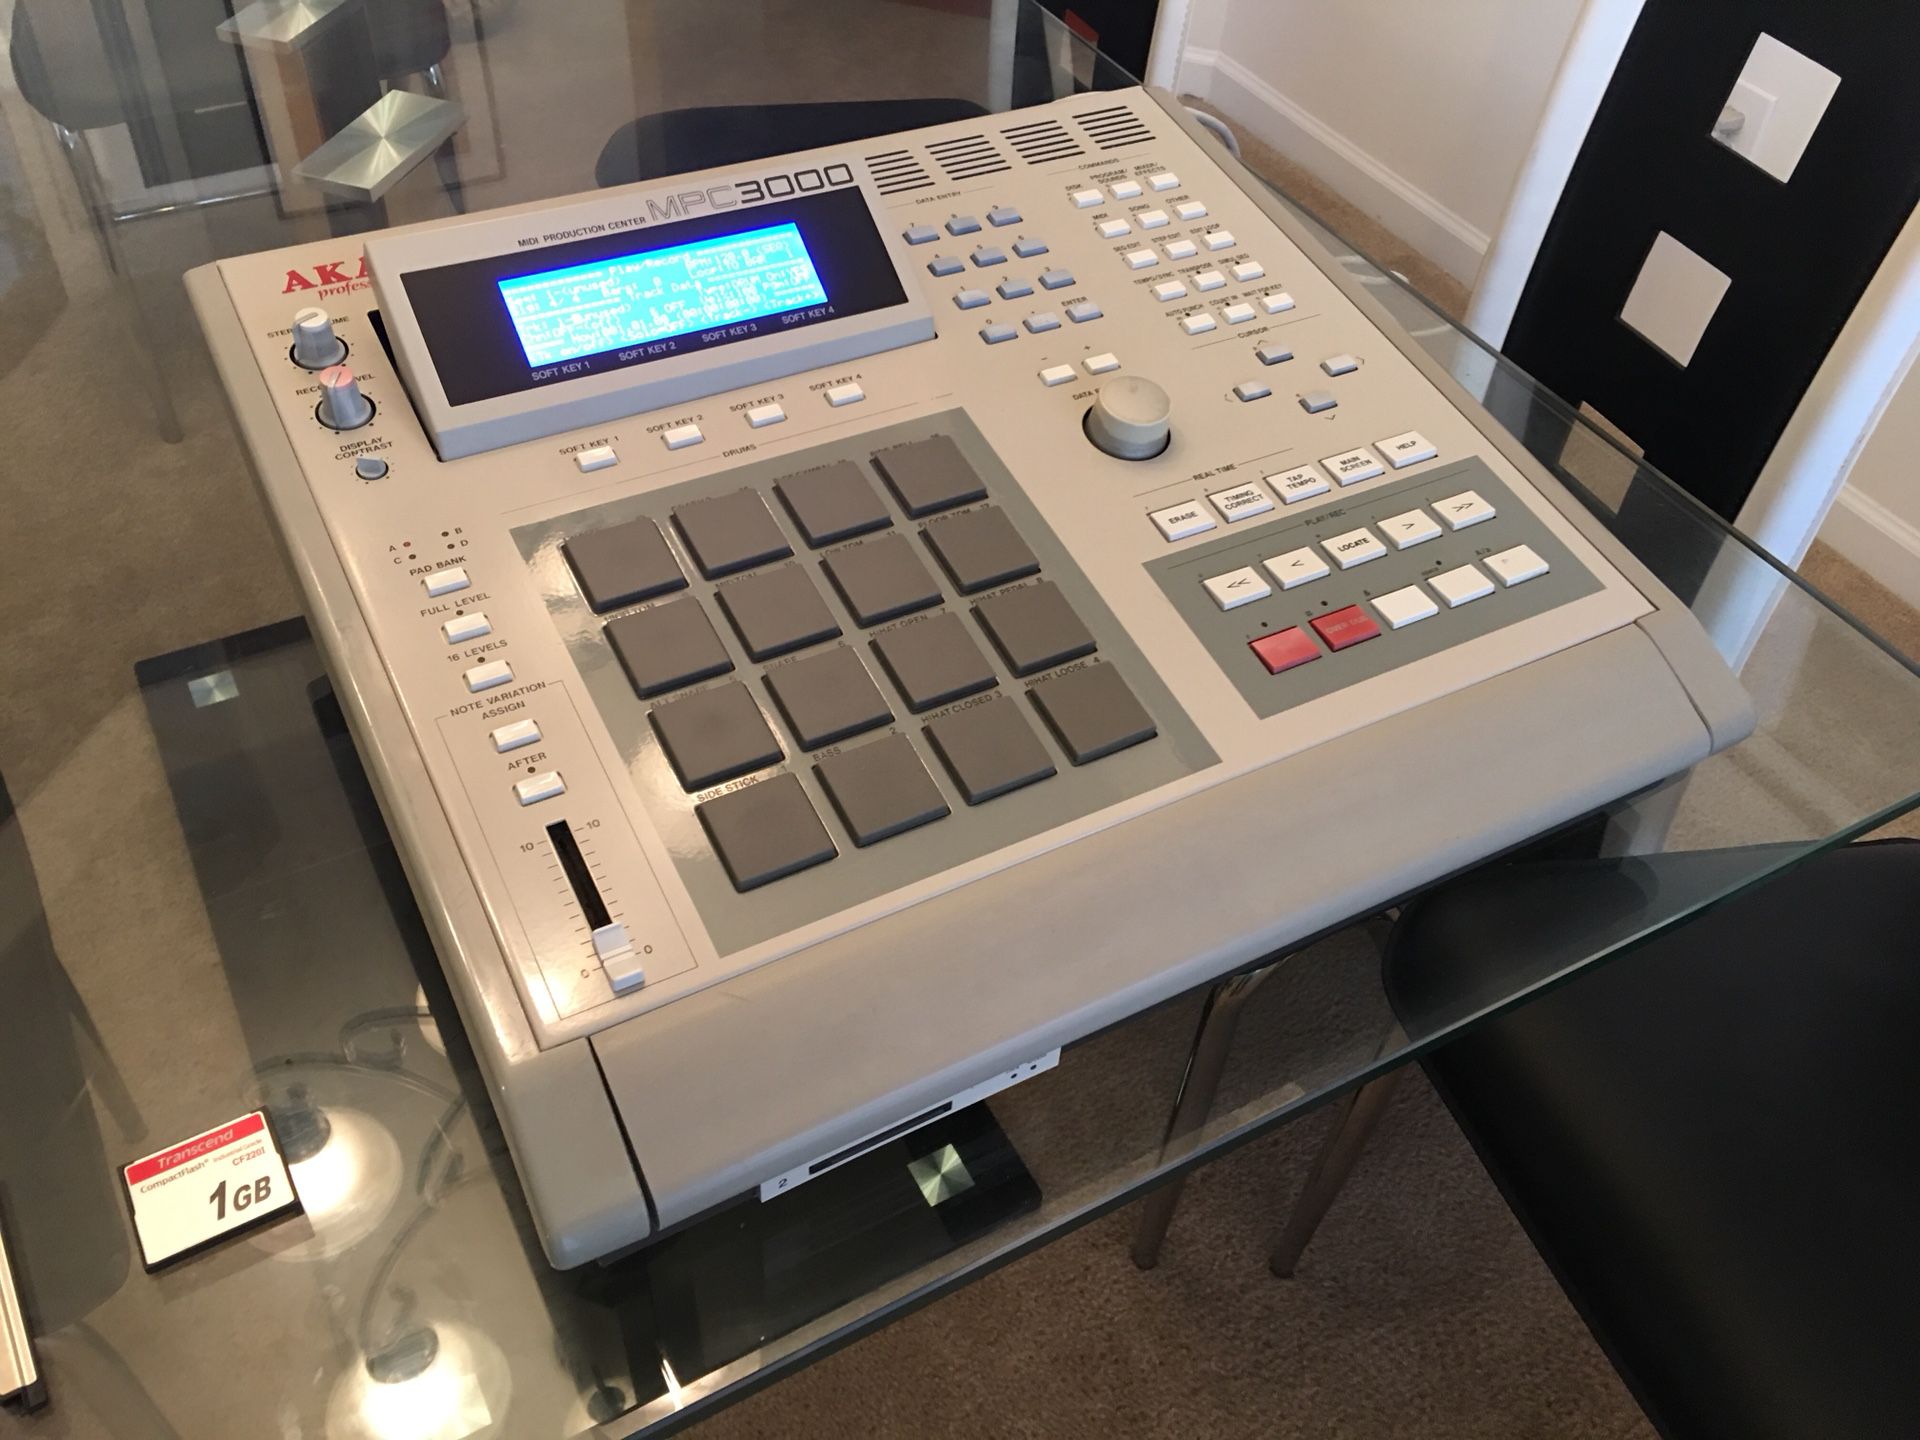 Akai MPC 3000 for Sale in Charlotte, NC - OfferUp